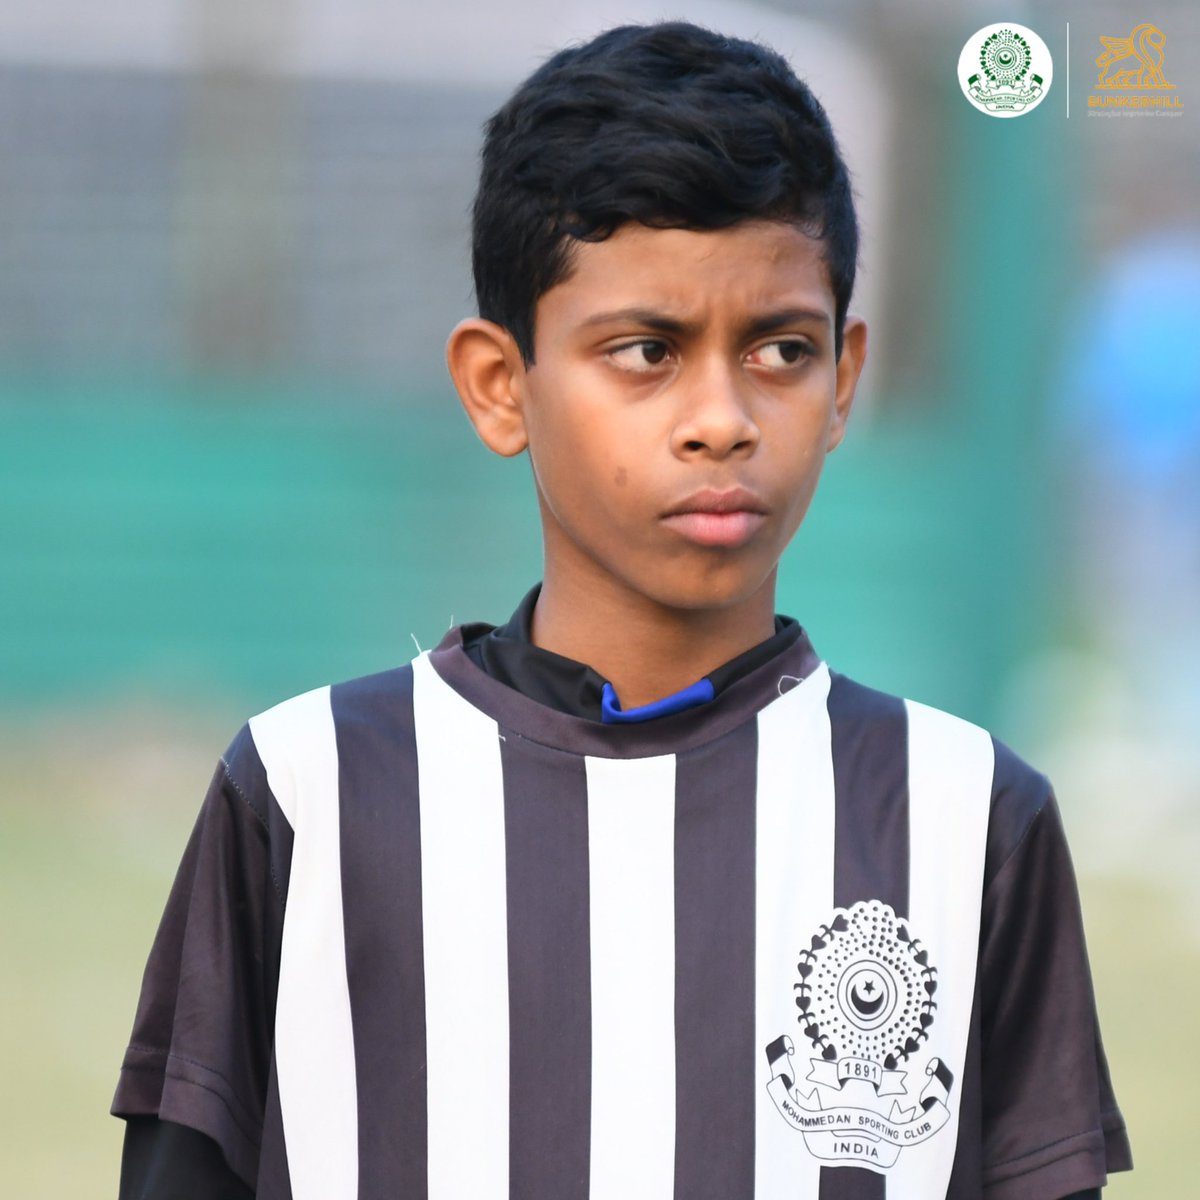 The heartbeat of midweek! 🤩💪

Be a part of Kolkata’s 132 year old legacy. ⚽

Join Now❗

📍Mohammedan Sporting Club
🗓 Every Friday, Saturday, Sunday

📲 For more details, contact +91 74396 99224

#JaanJaanMohammedan 💪🏼#BlackAndWhiteBrigade 🤍🖤 #IndianFootball ⚽